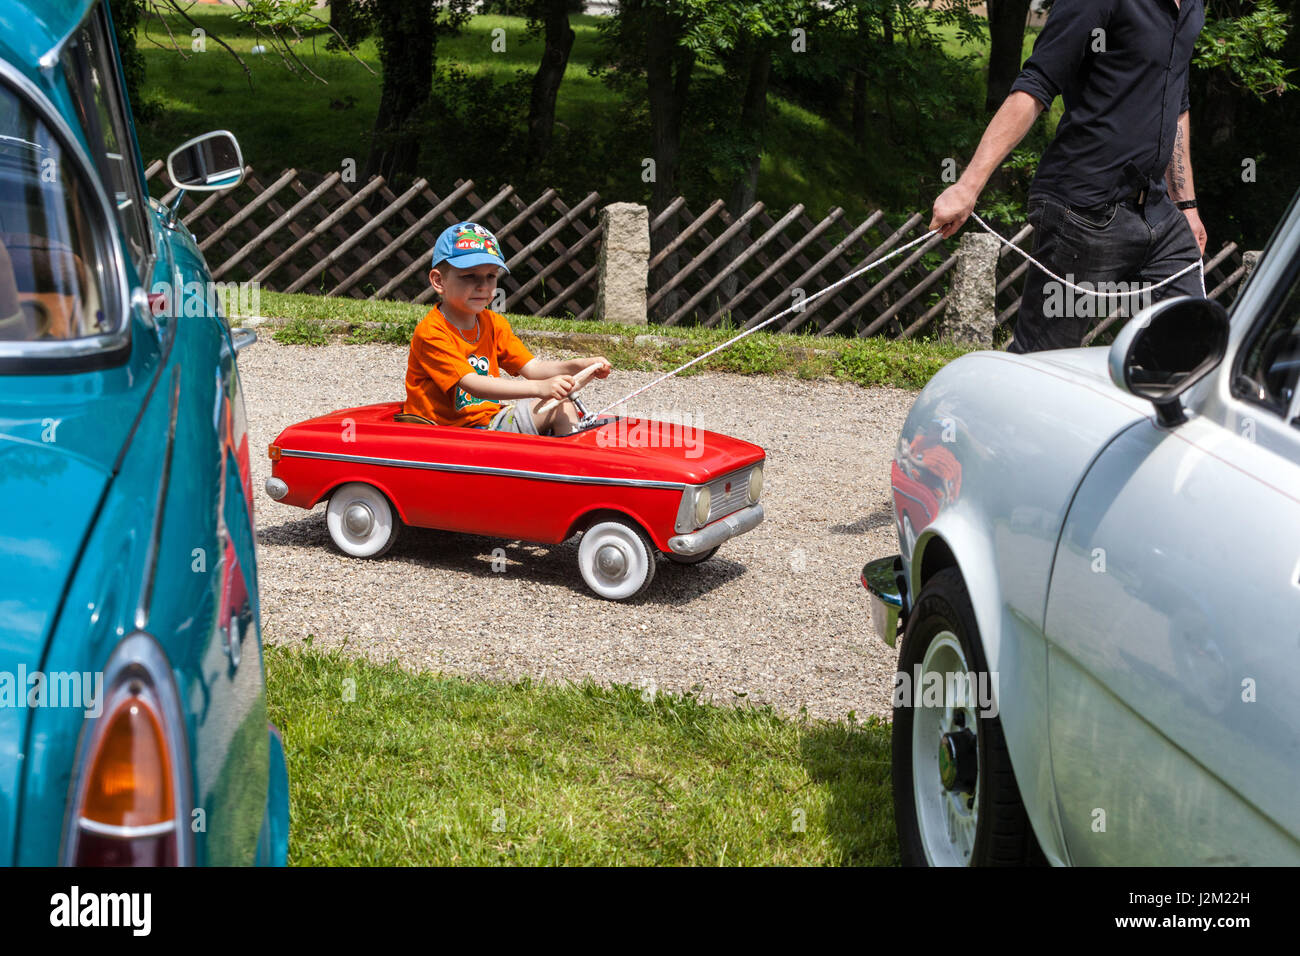 A child in a pedal car toy at a veteran meeting, Czech Republic, Europe Stock Photo